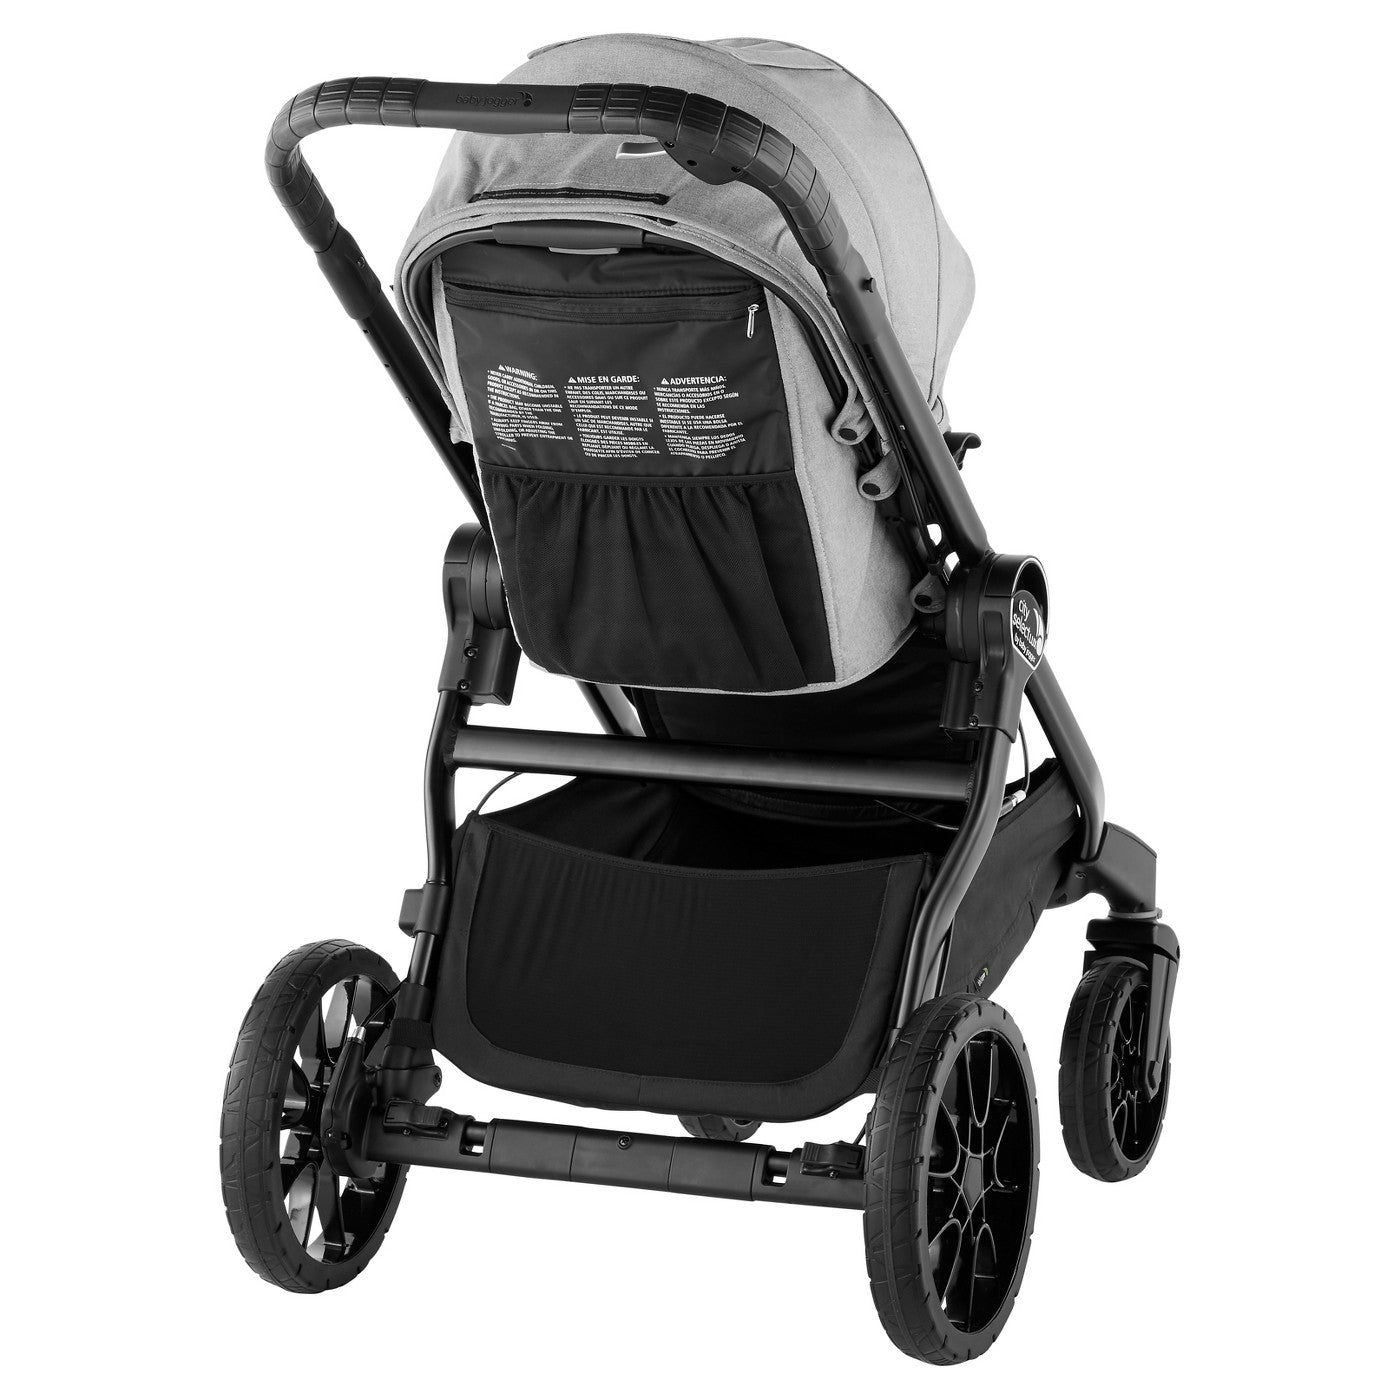 city select baby stroller